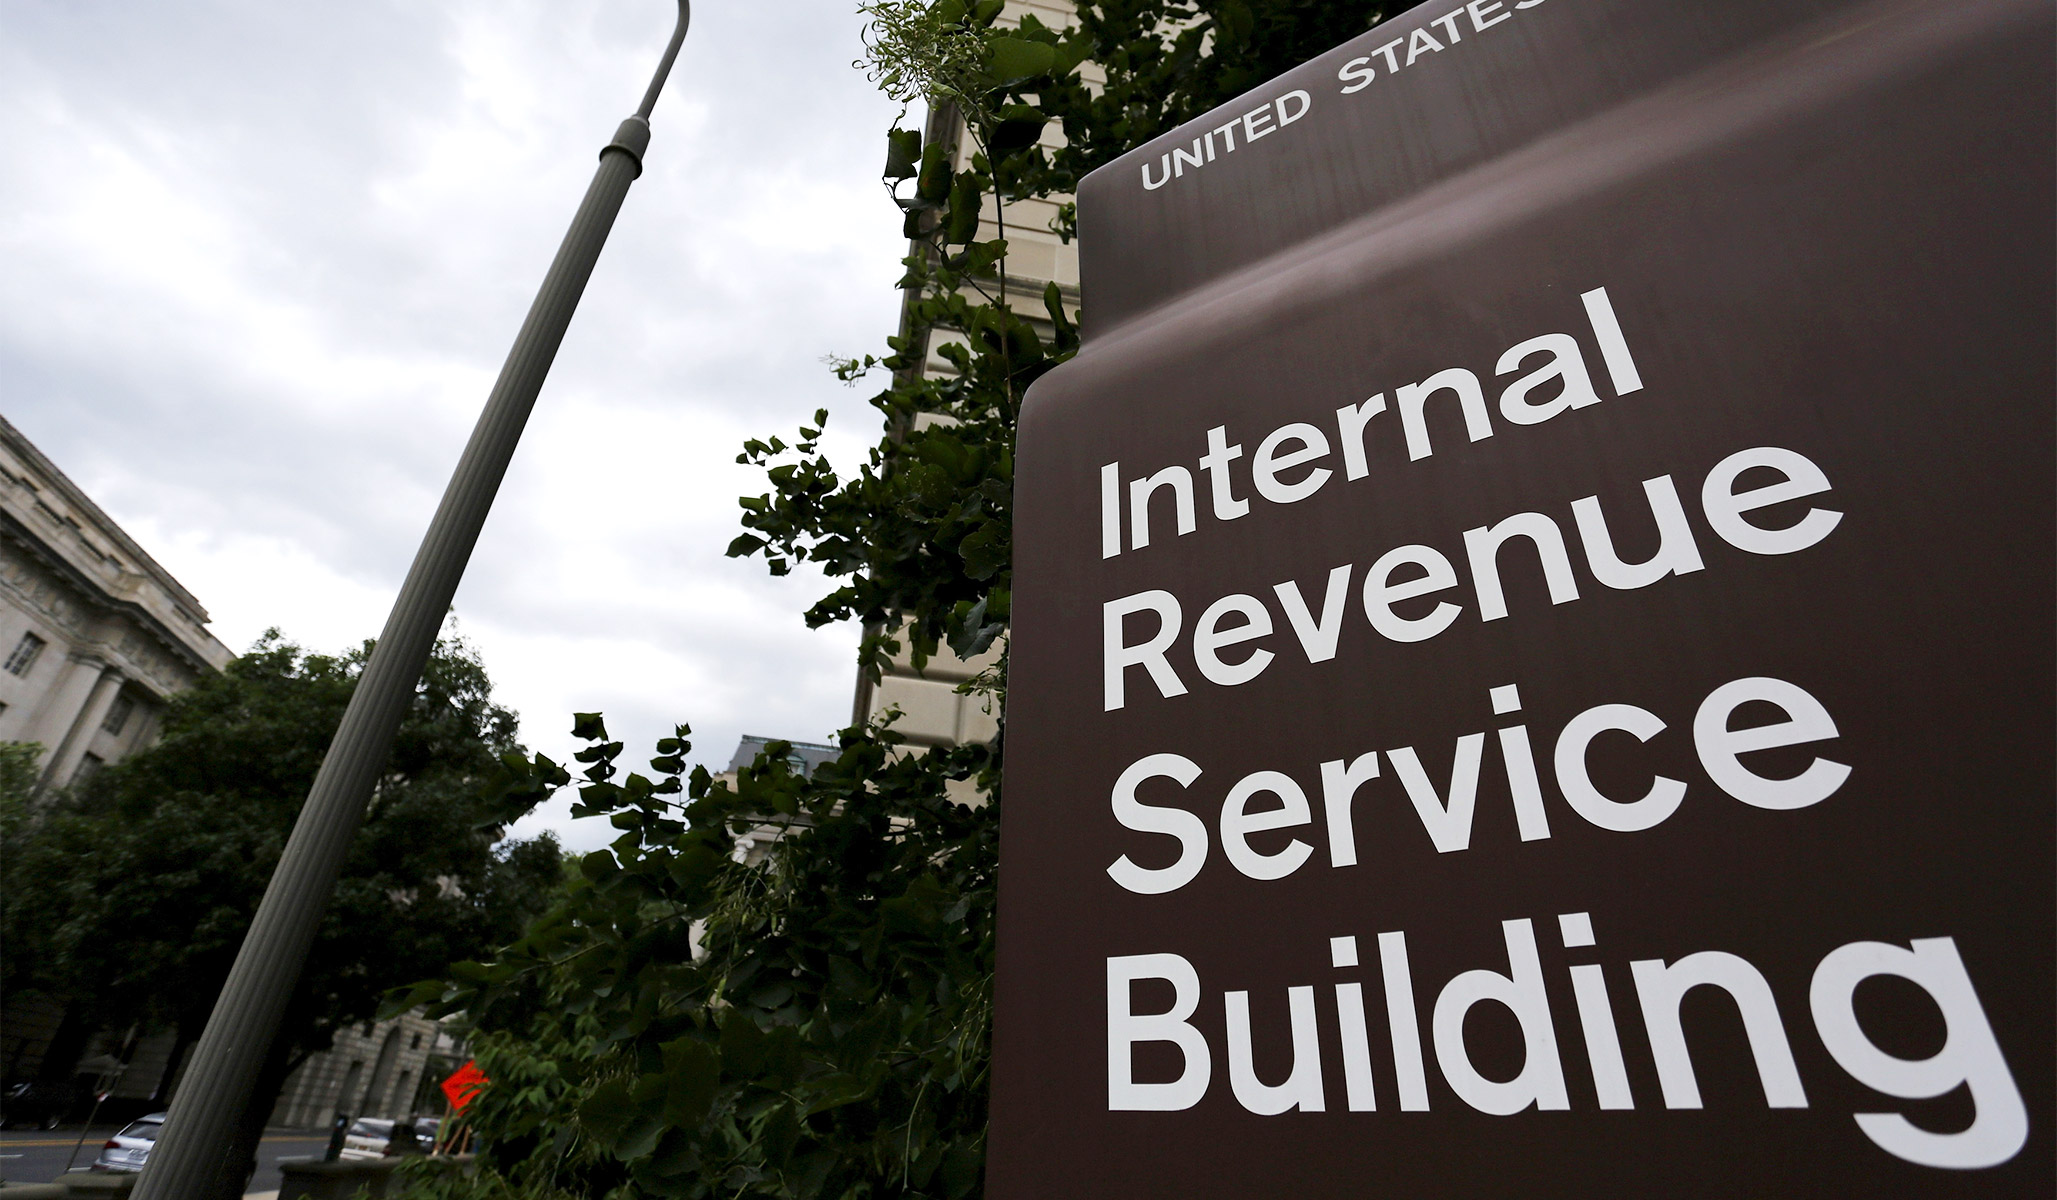 IRS Deletes Job Posting Seeking Applicants Willing to ‘Use Deadly Force’